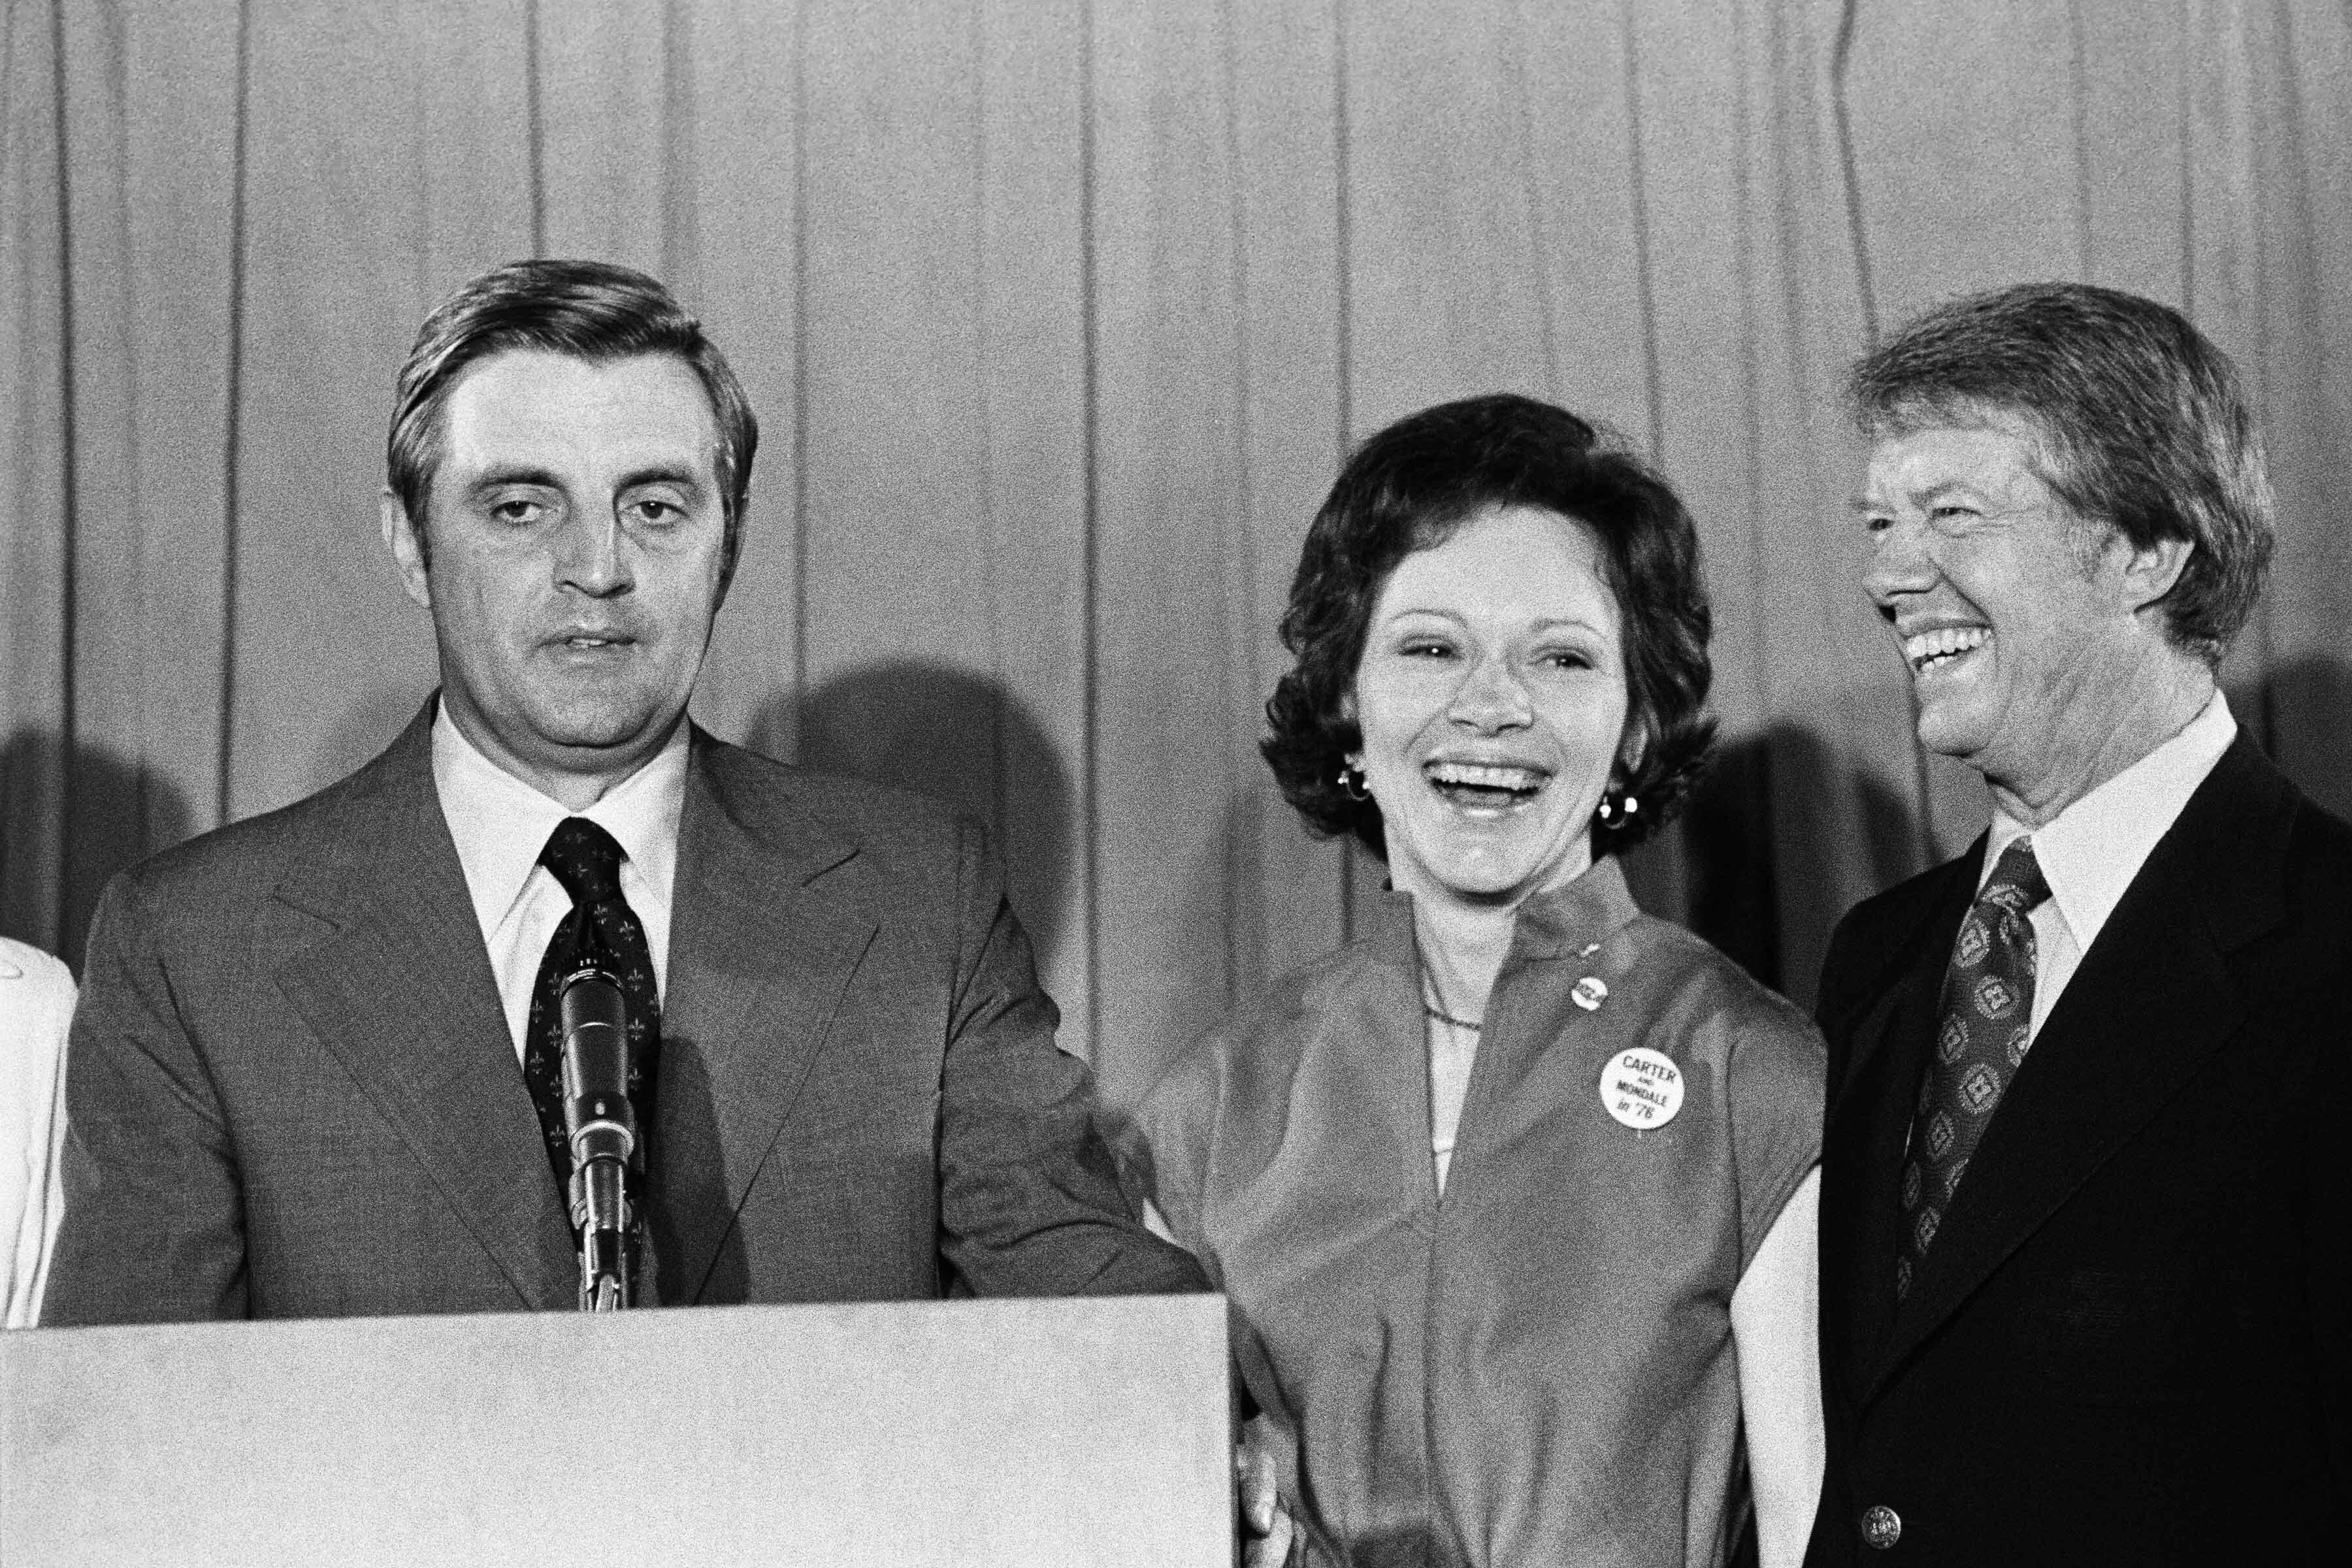 Jimmy Carter taps Walter F. Mondale as his Vice President running mate at the Democratic National Convention. | Source: Getty Images